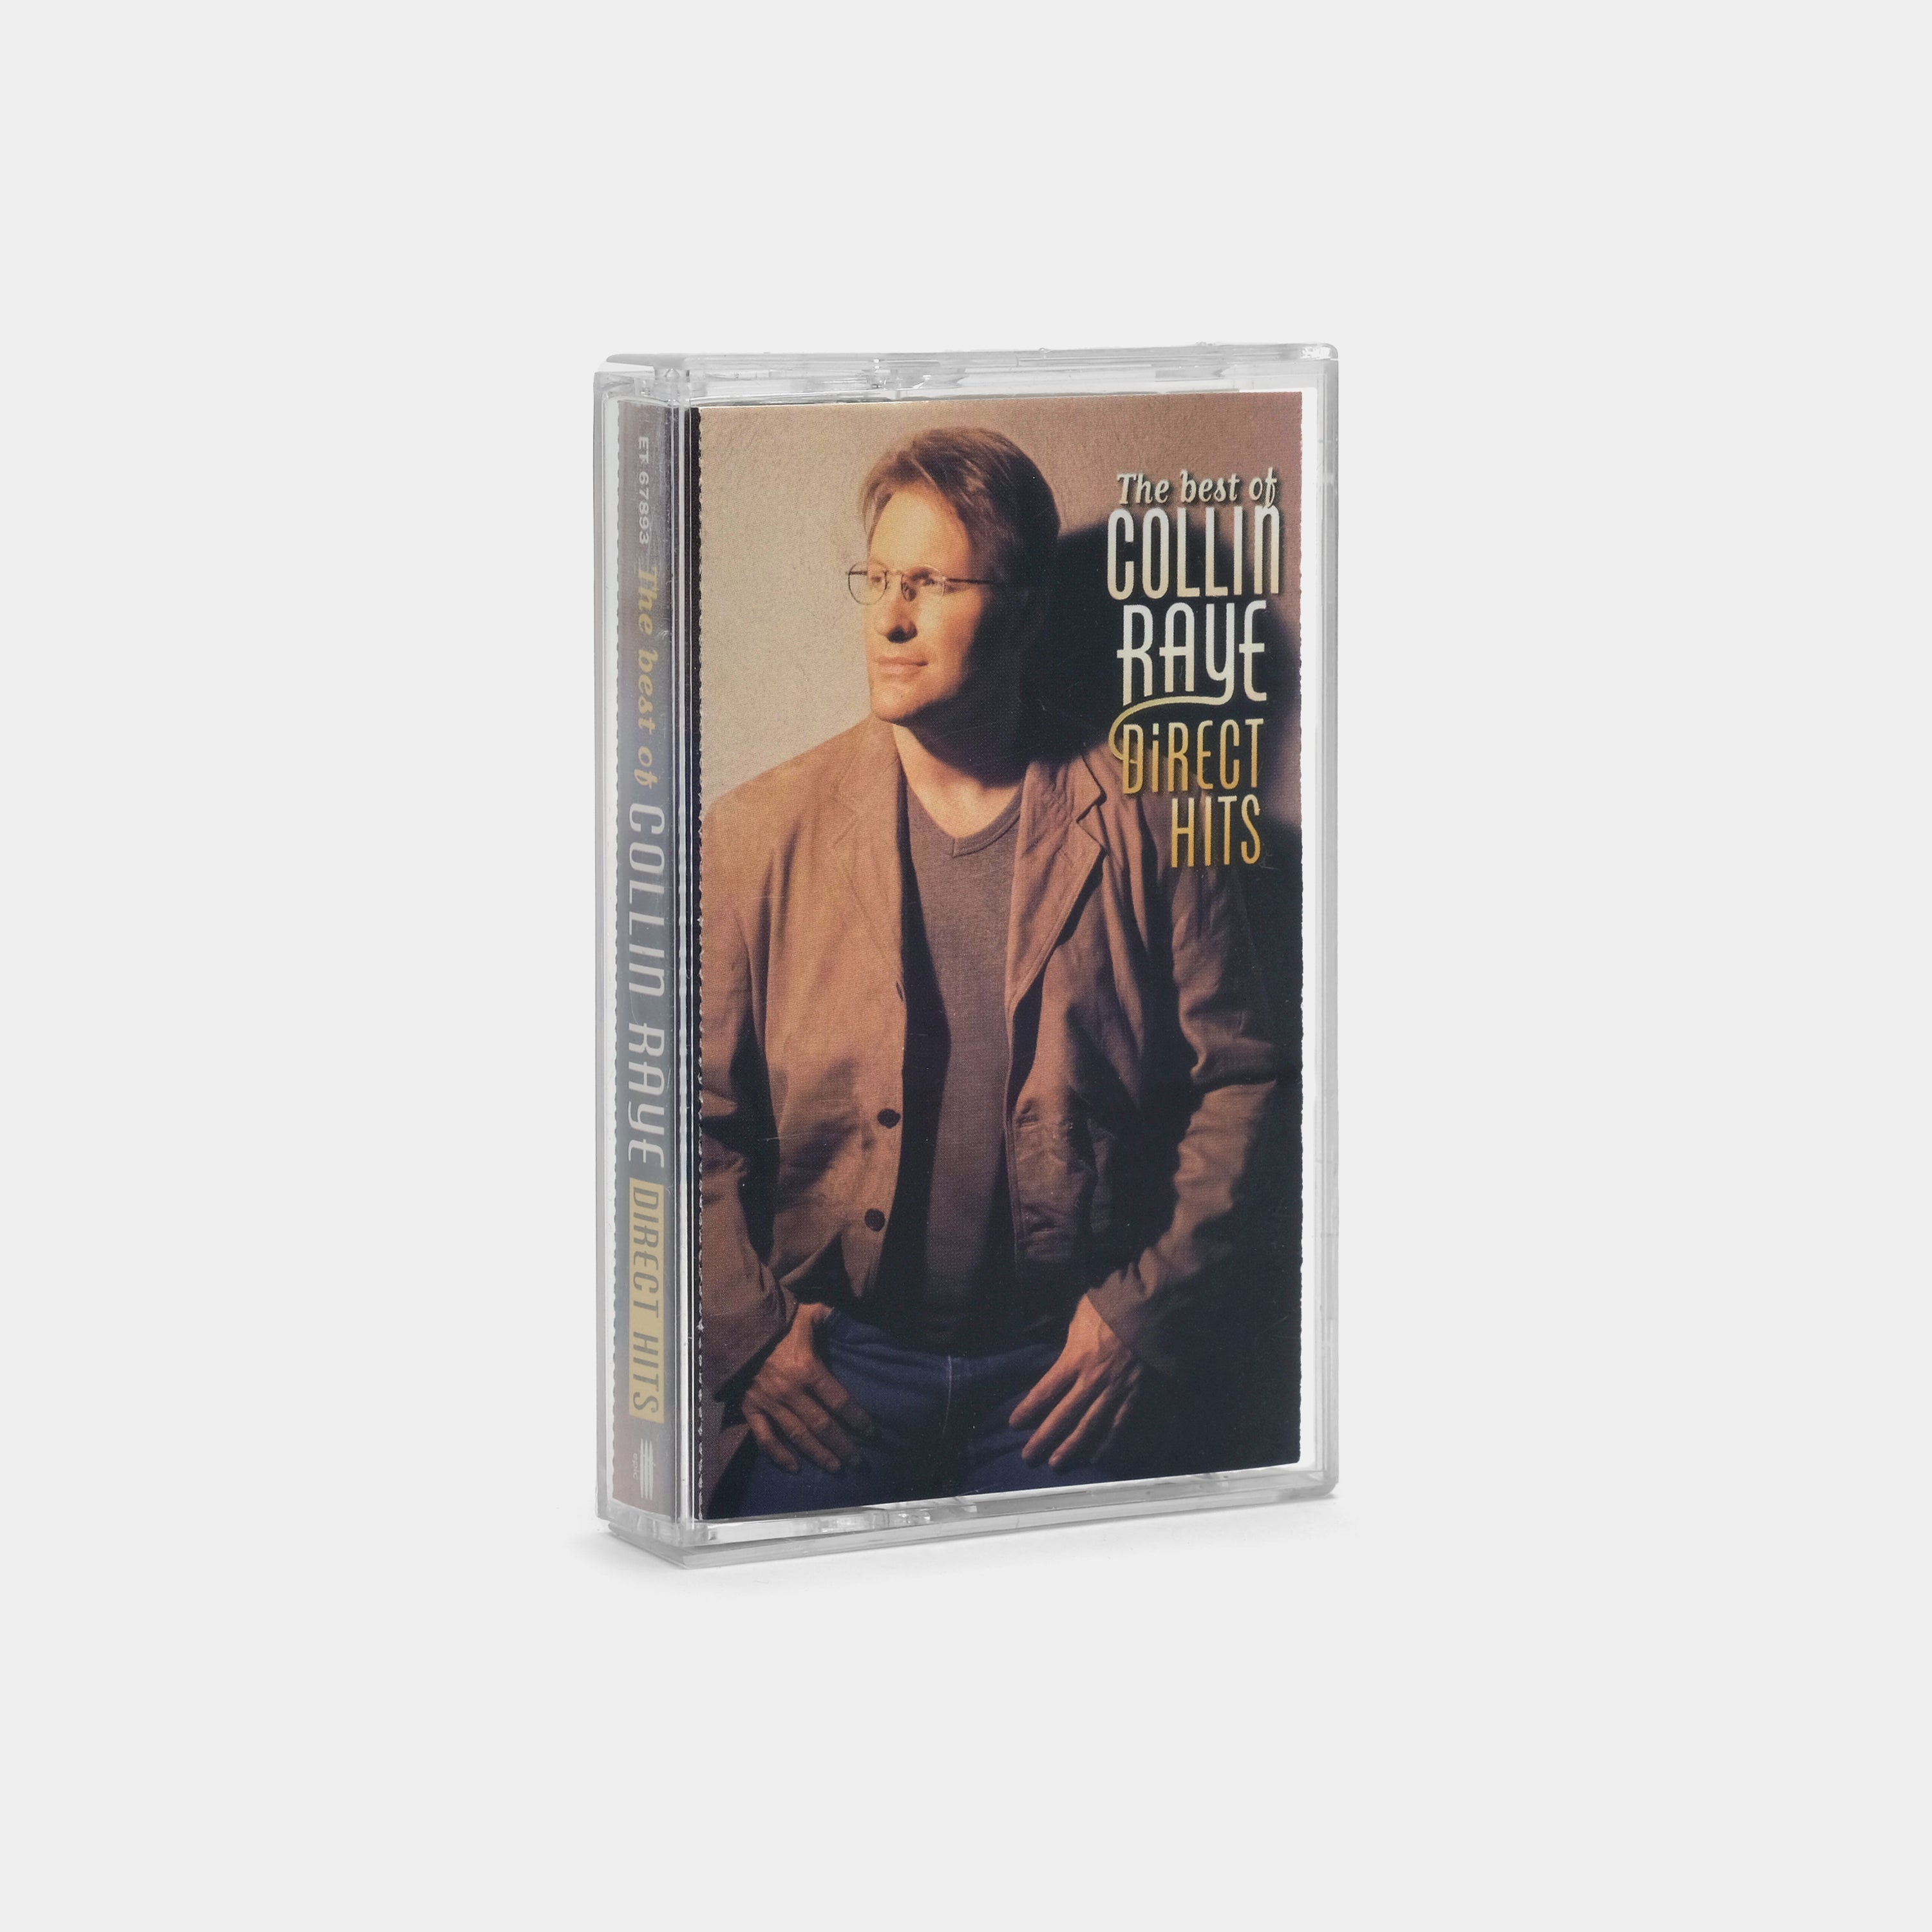 Collin Raye - Direct Hits (The Best Of Collin Raye) Cassette Tape